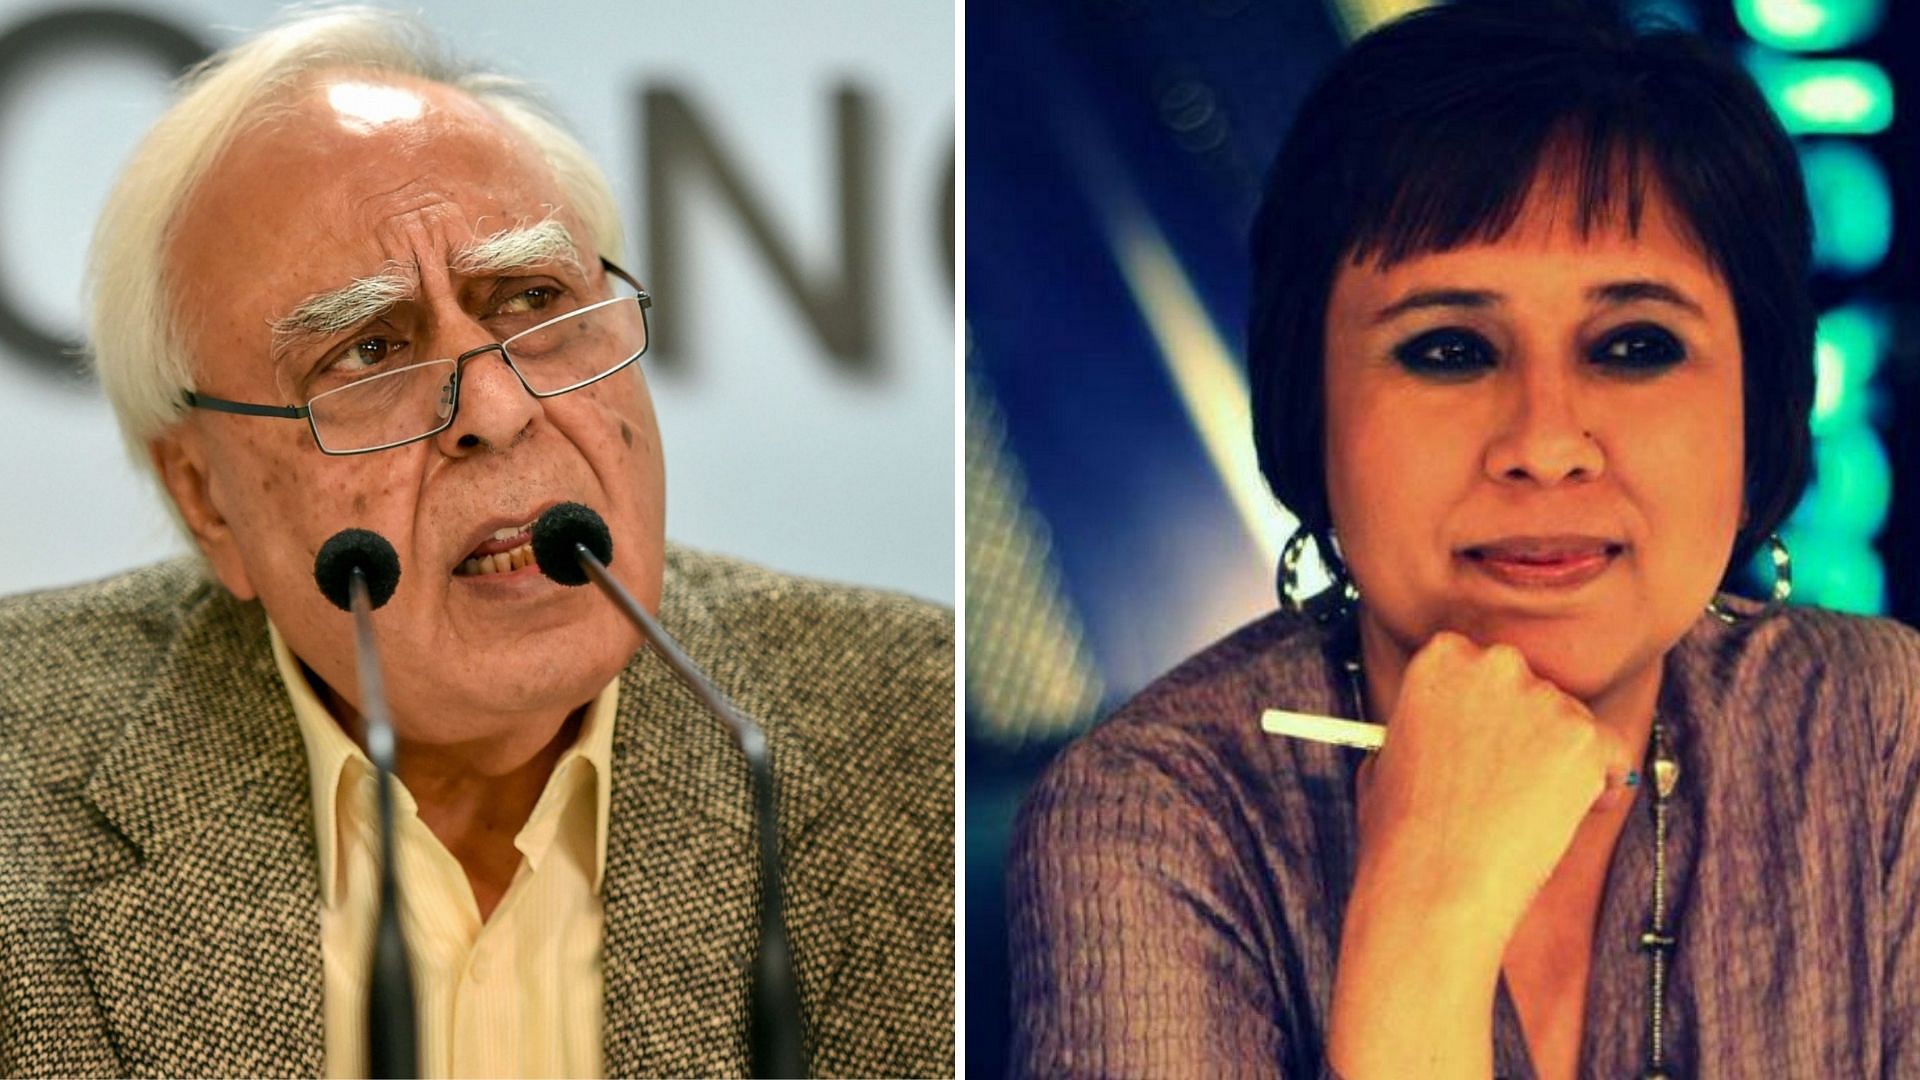 Barkha Dutt accused Sibal – who backs the channel – of treating journalists in a “hideous way”, “duping and cheating” them.